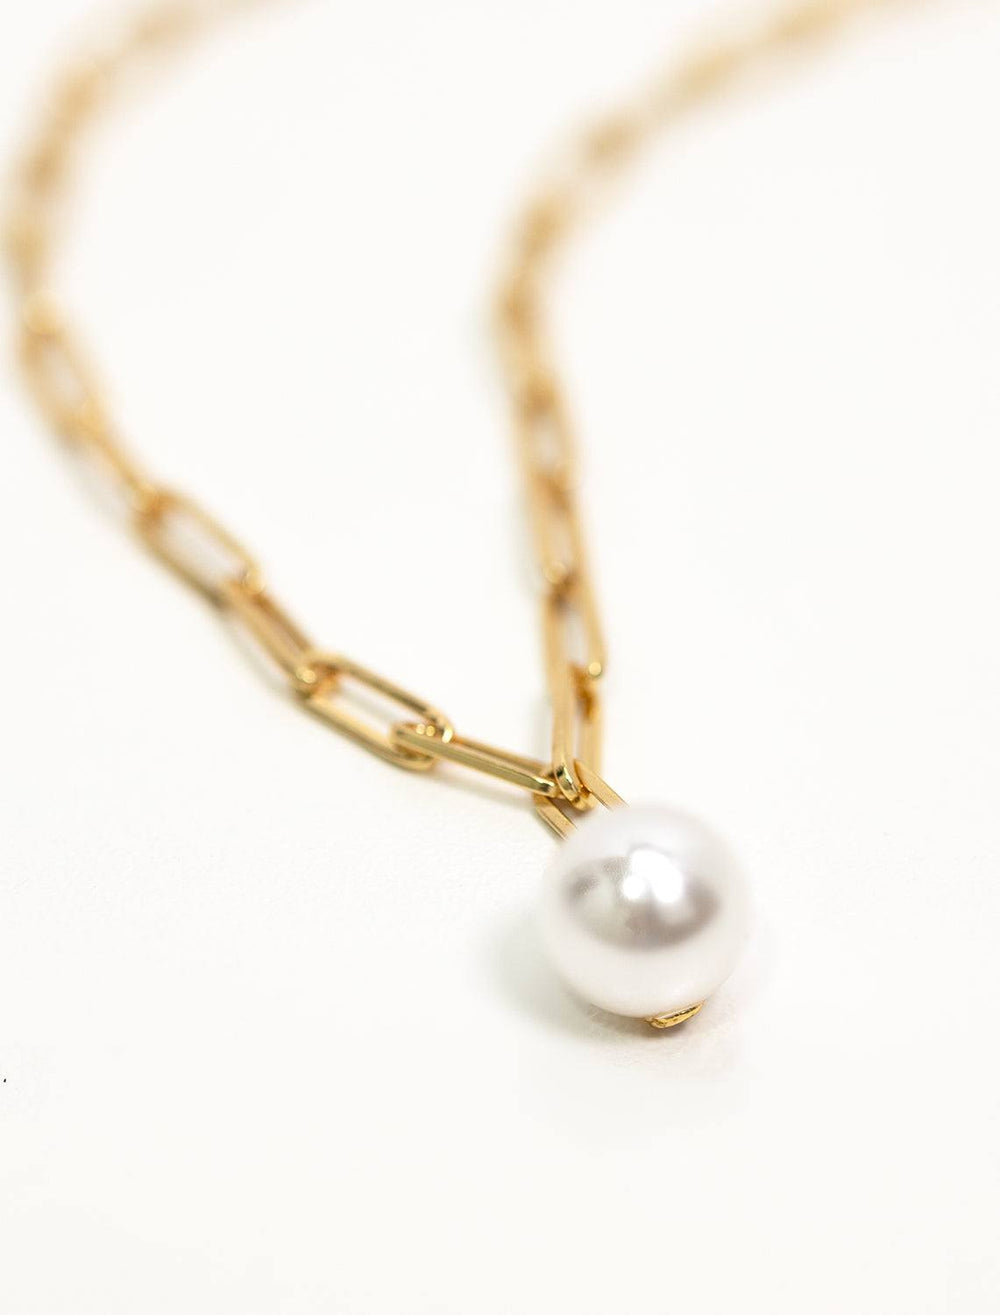 Tai jewelry's chain link necklace with pearl accent in gold.